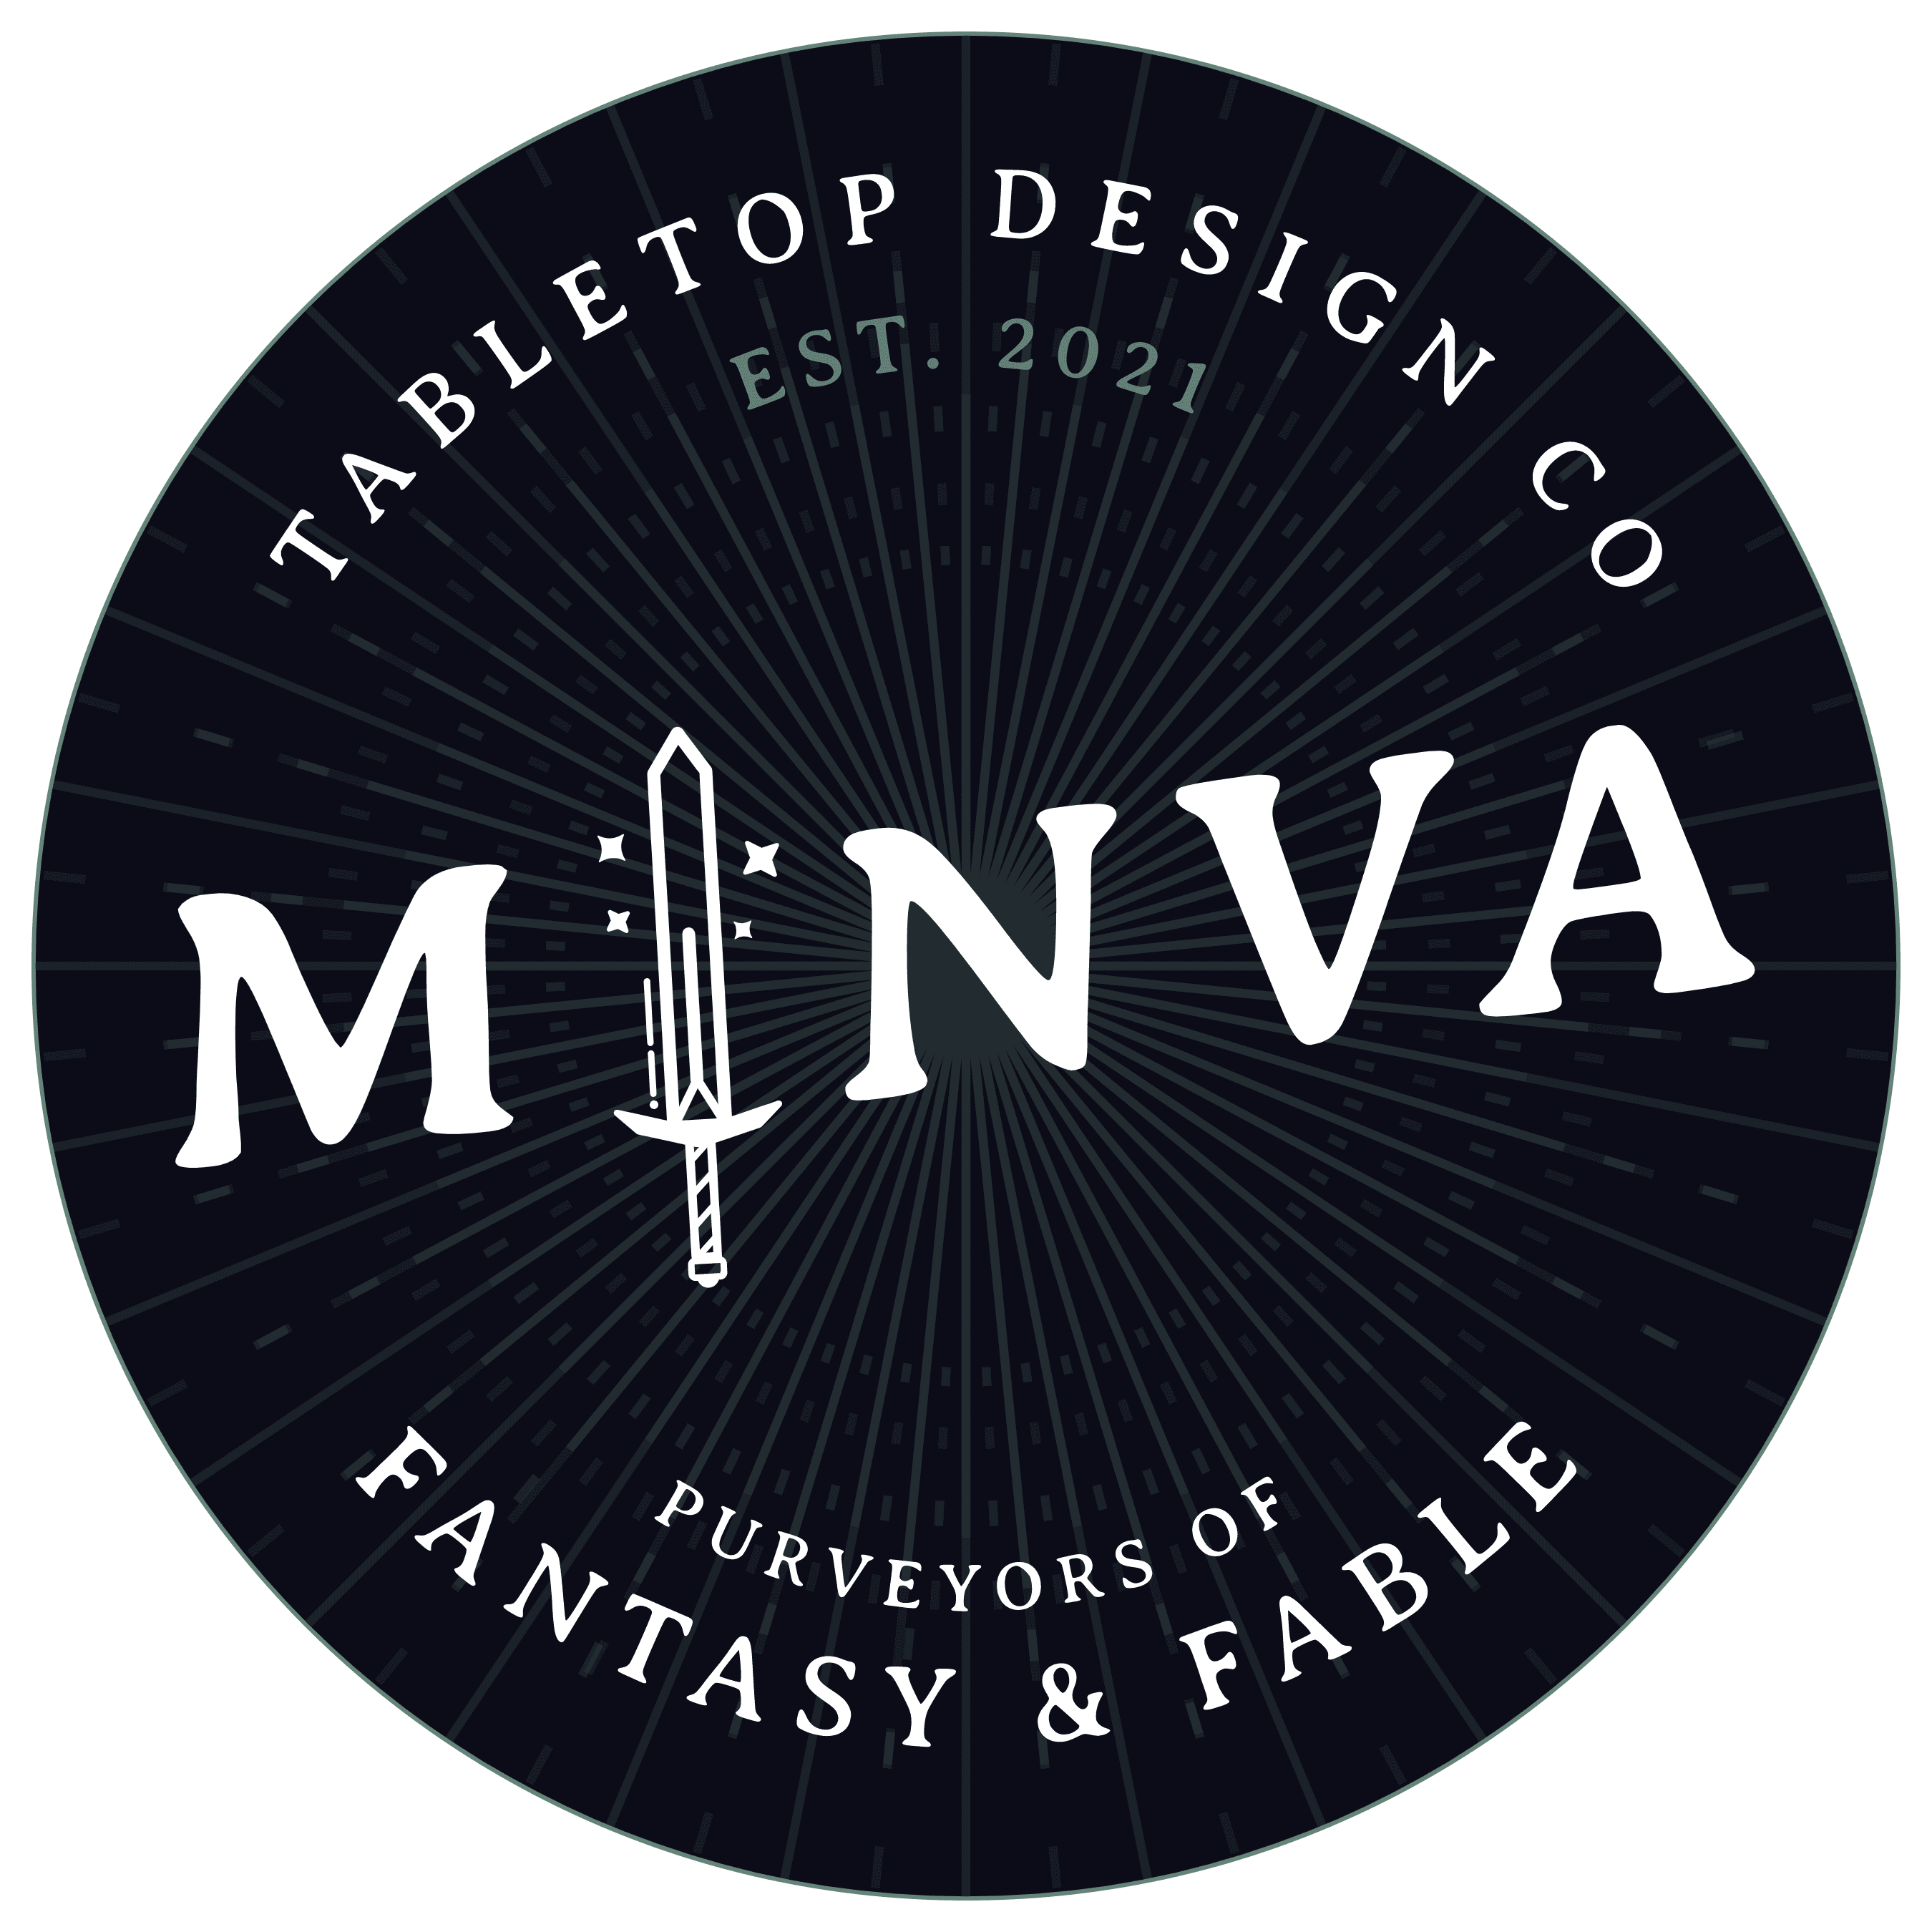 Minva Tabletop Replaying Design Dungeons & Dragons Quest RPG